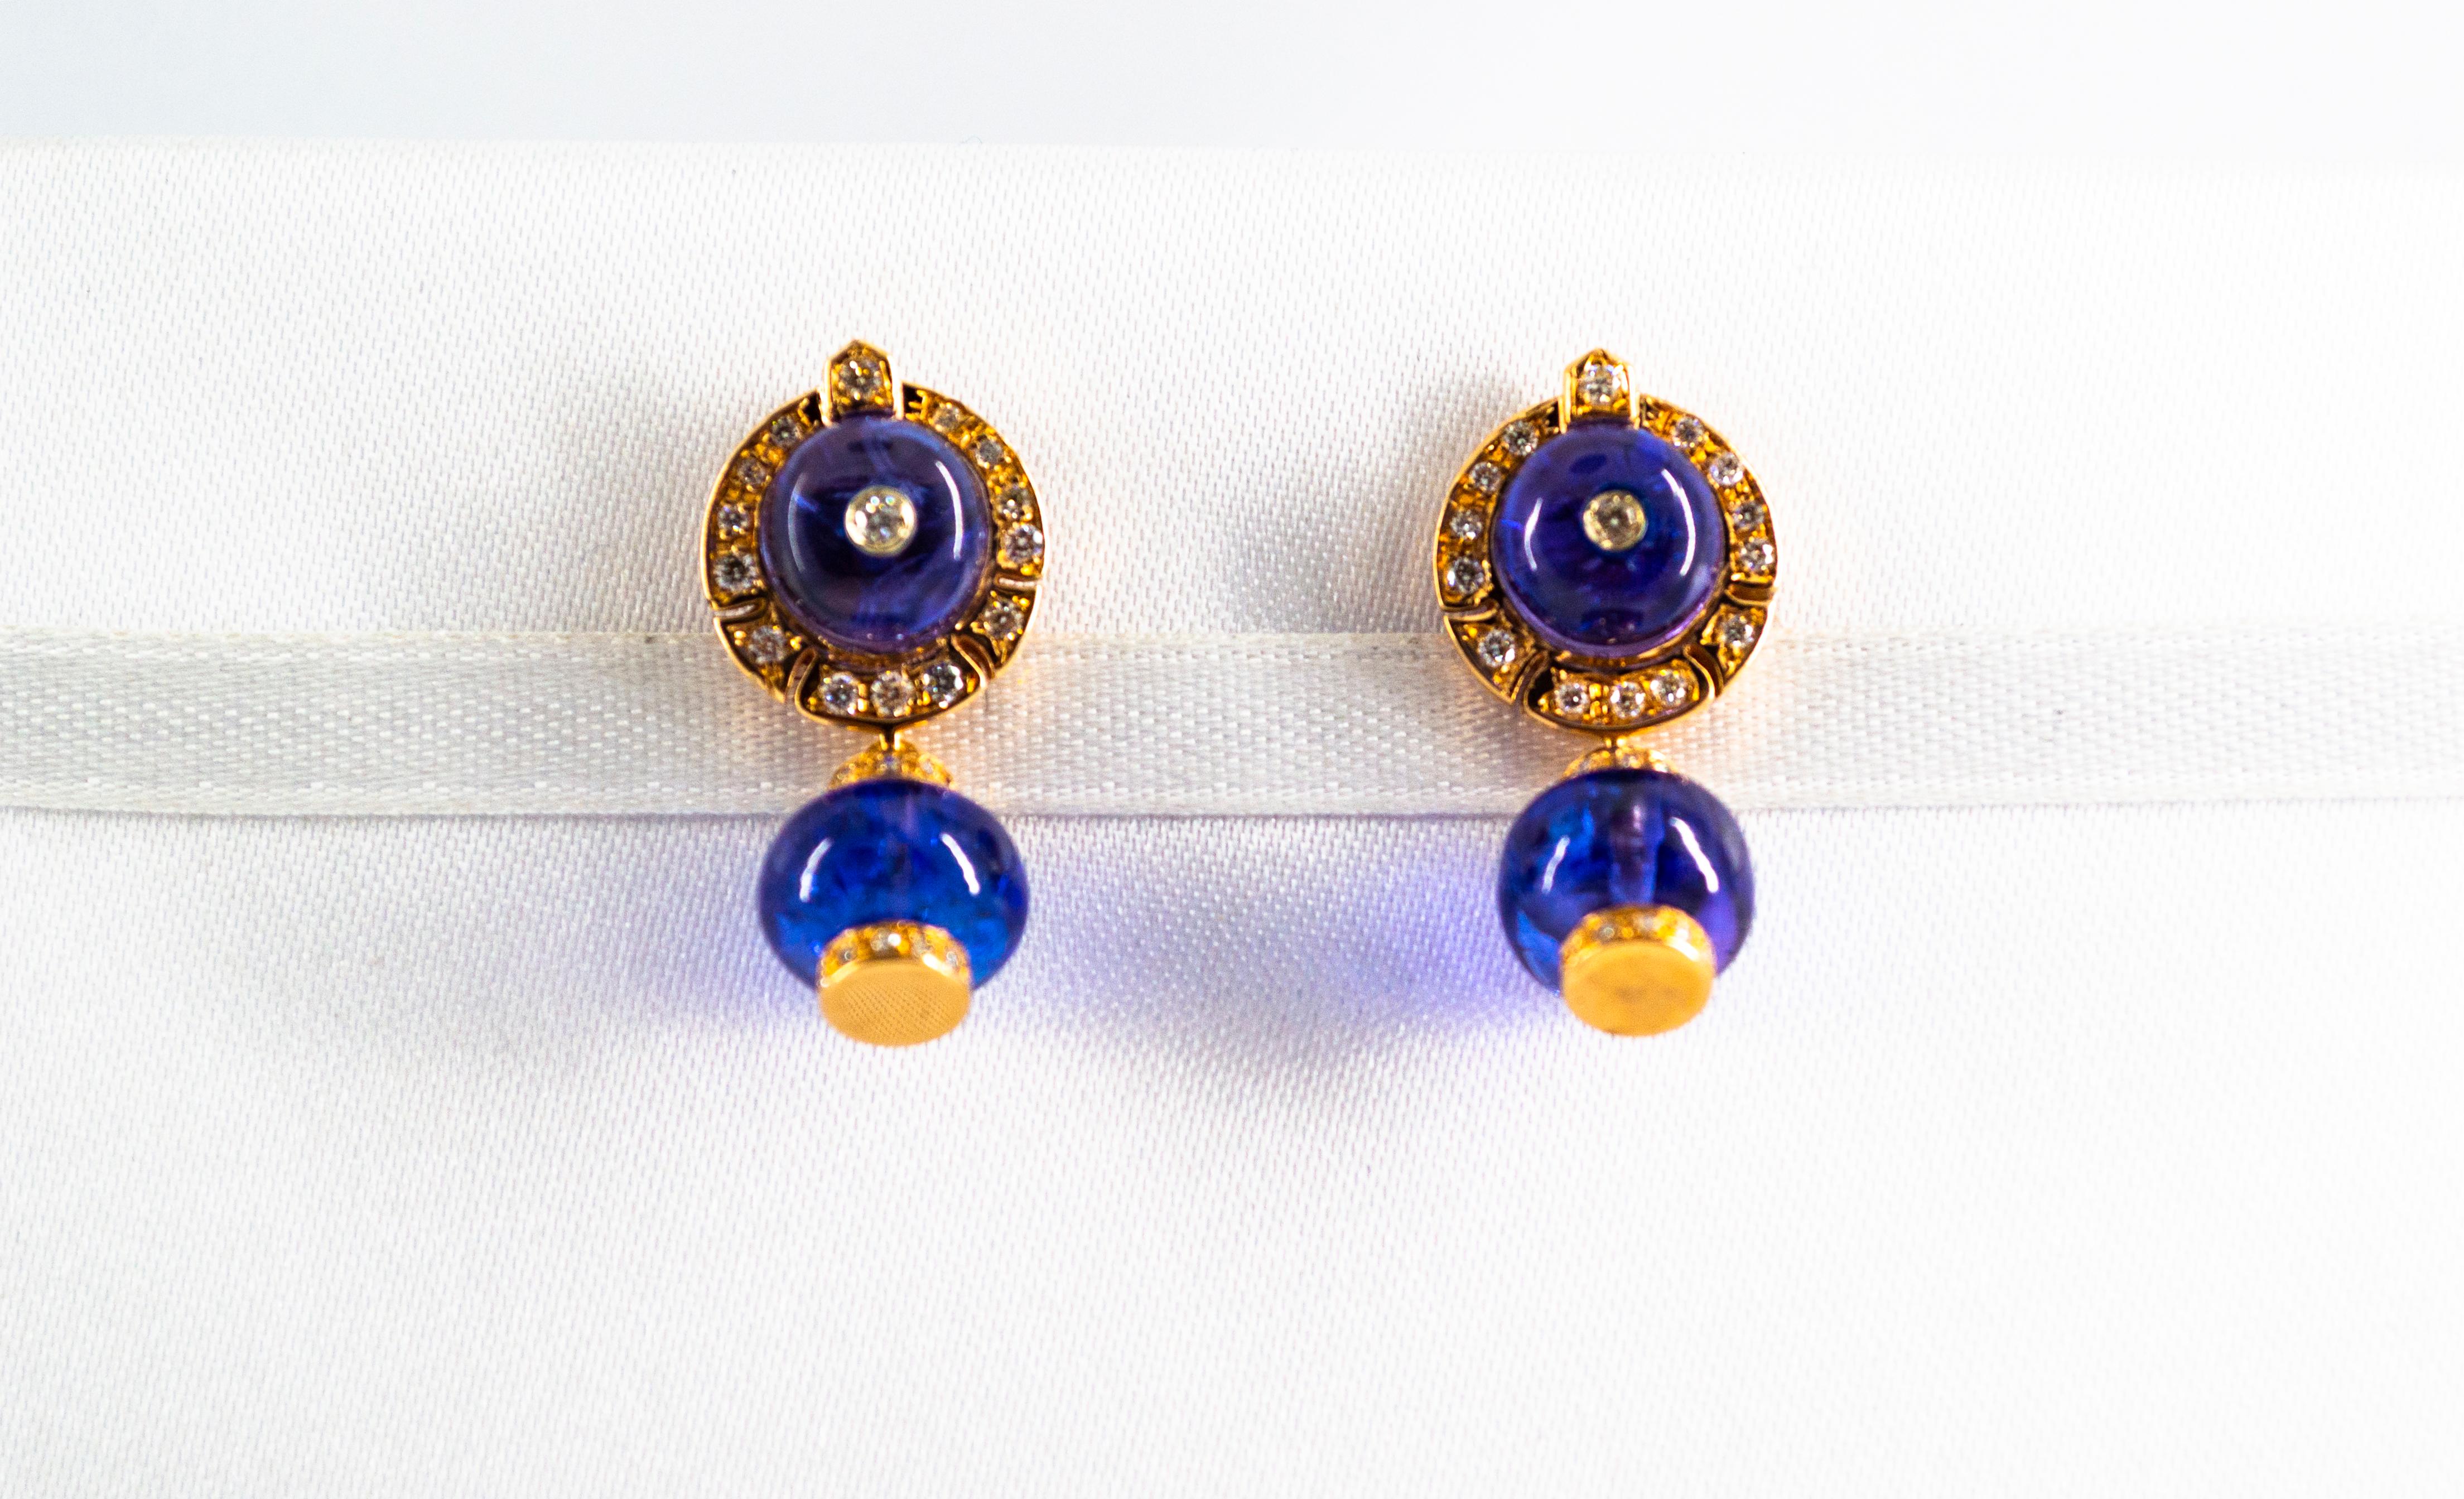 These Earrings are made of 14K Yellow Gold.
These Earrings have 0.50 Carats of White Modern Round Cut Diamonds.
These Earrings have 21.00 Carats of Tanzanite.
All our Earrings have pins for pierced ears but we can change the closure and make any of